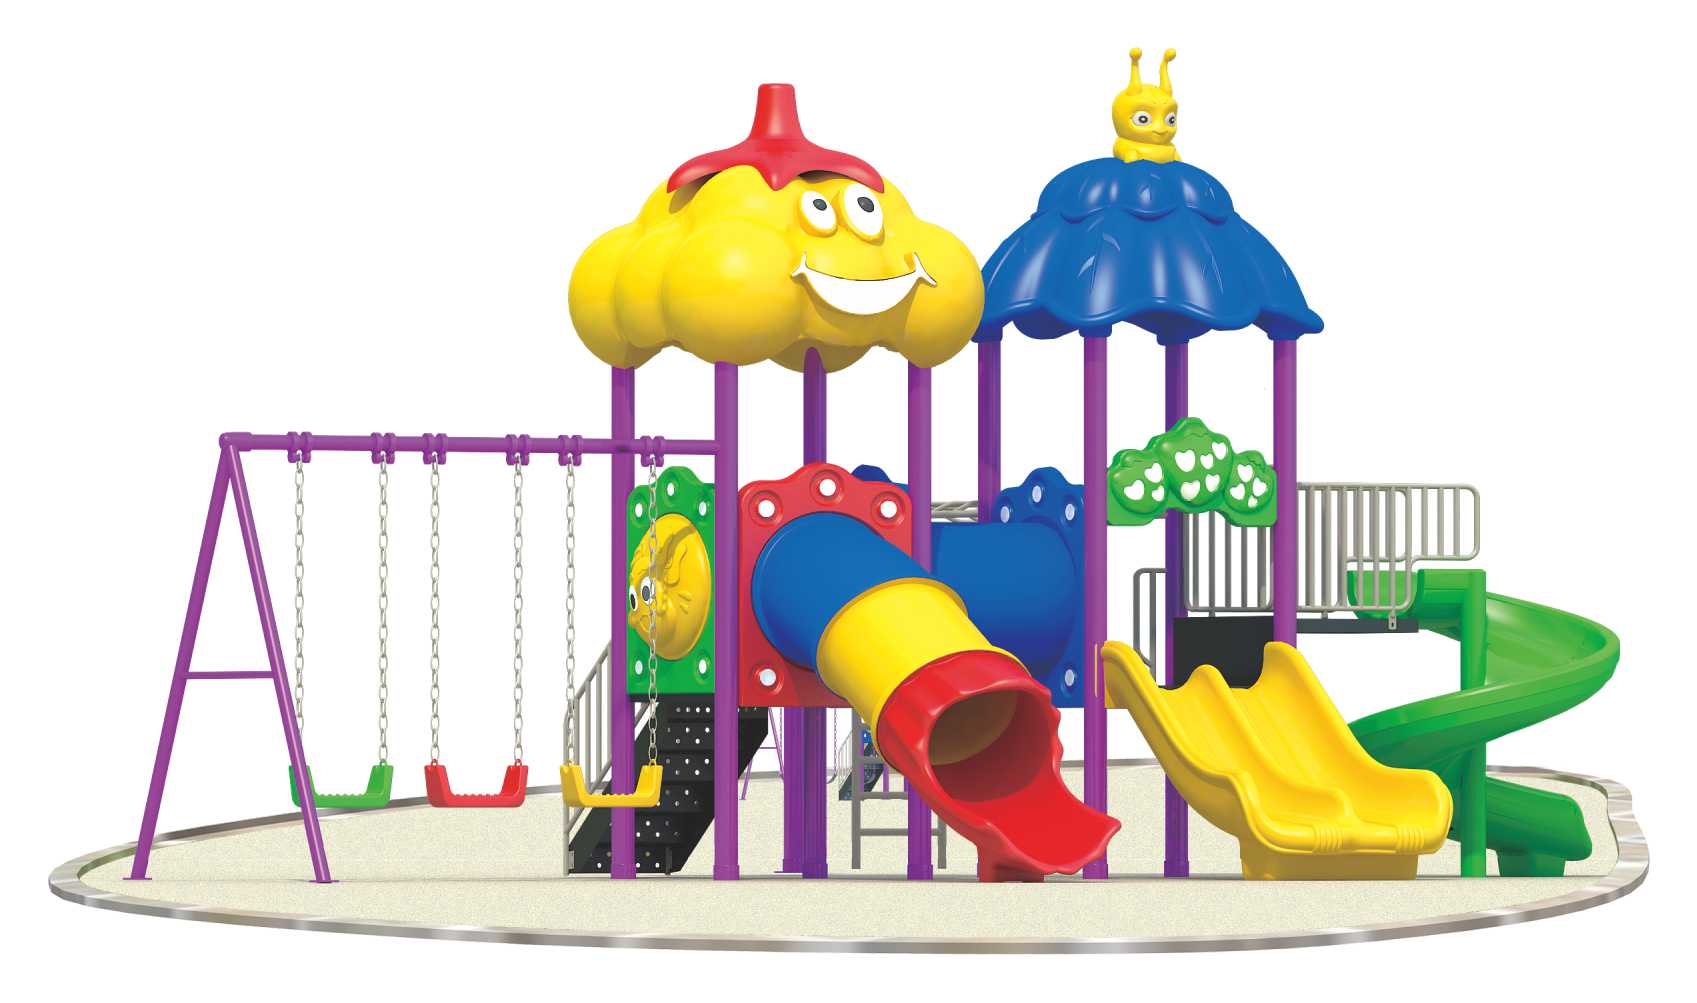 Rbwtoys Outdoor Play Toys Slide For Kids And Swing For Kids Playground Toys High Quality For Kids Activities Set Model No. RW-12010 Size 600&times;500&times;340cm